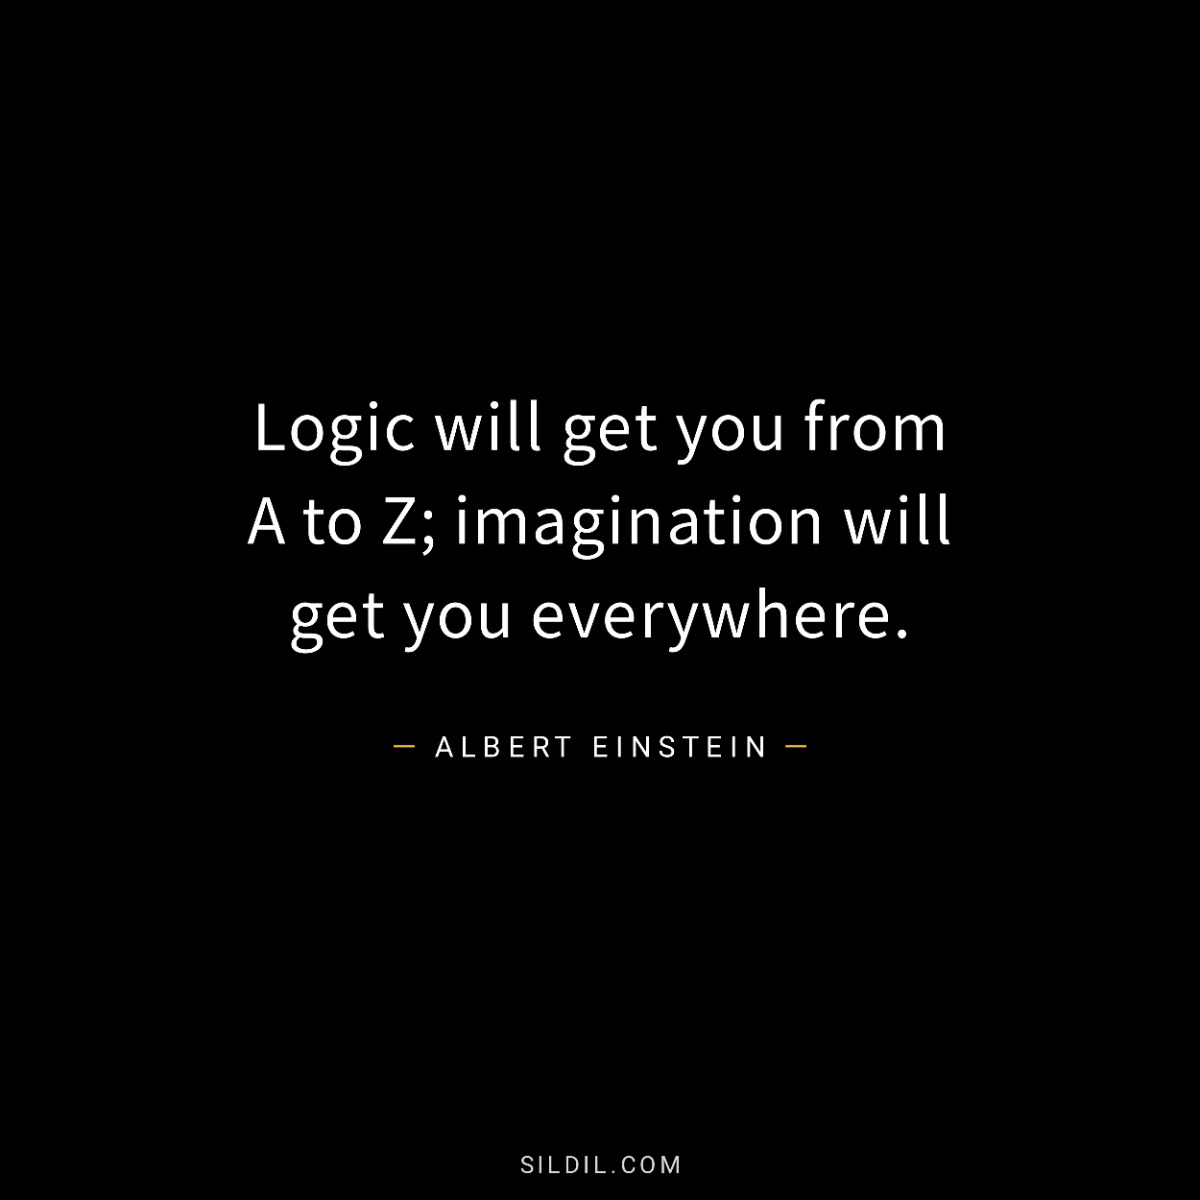 Logic will get you from A to Z; imagination will get you everywhere.